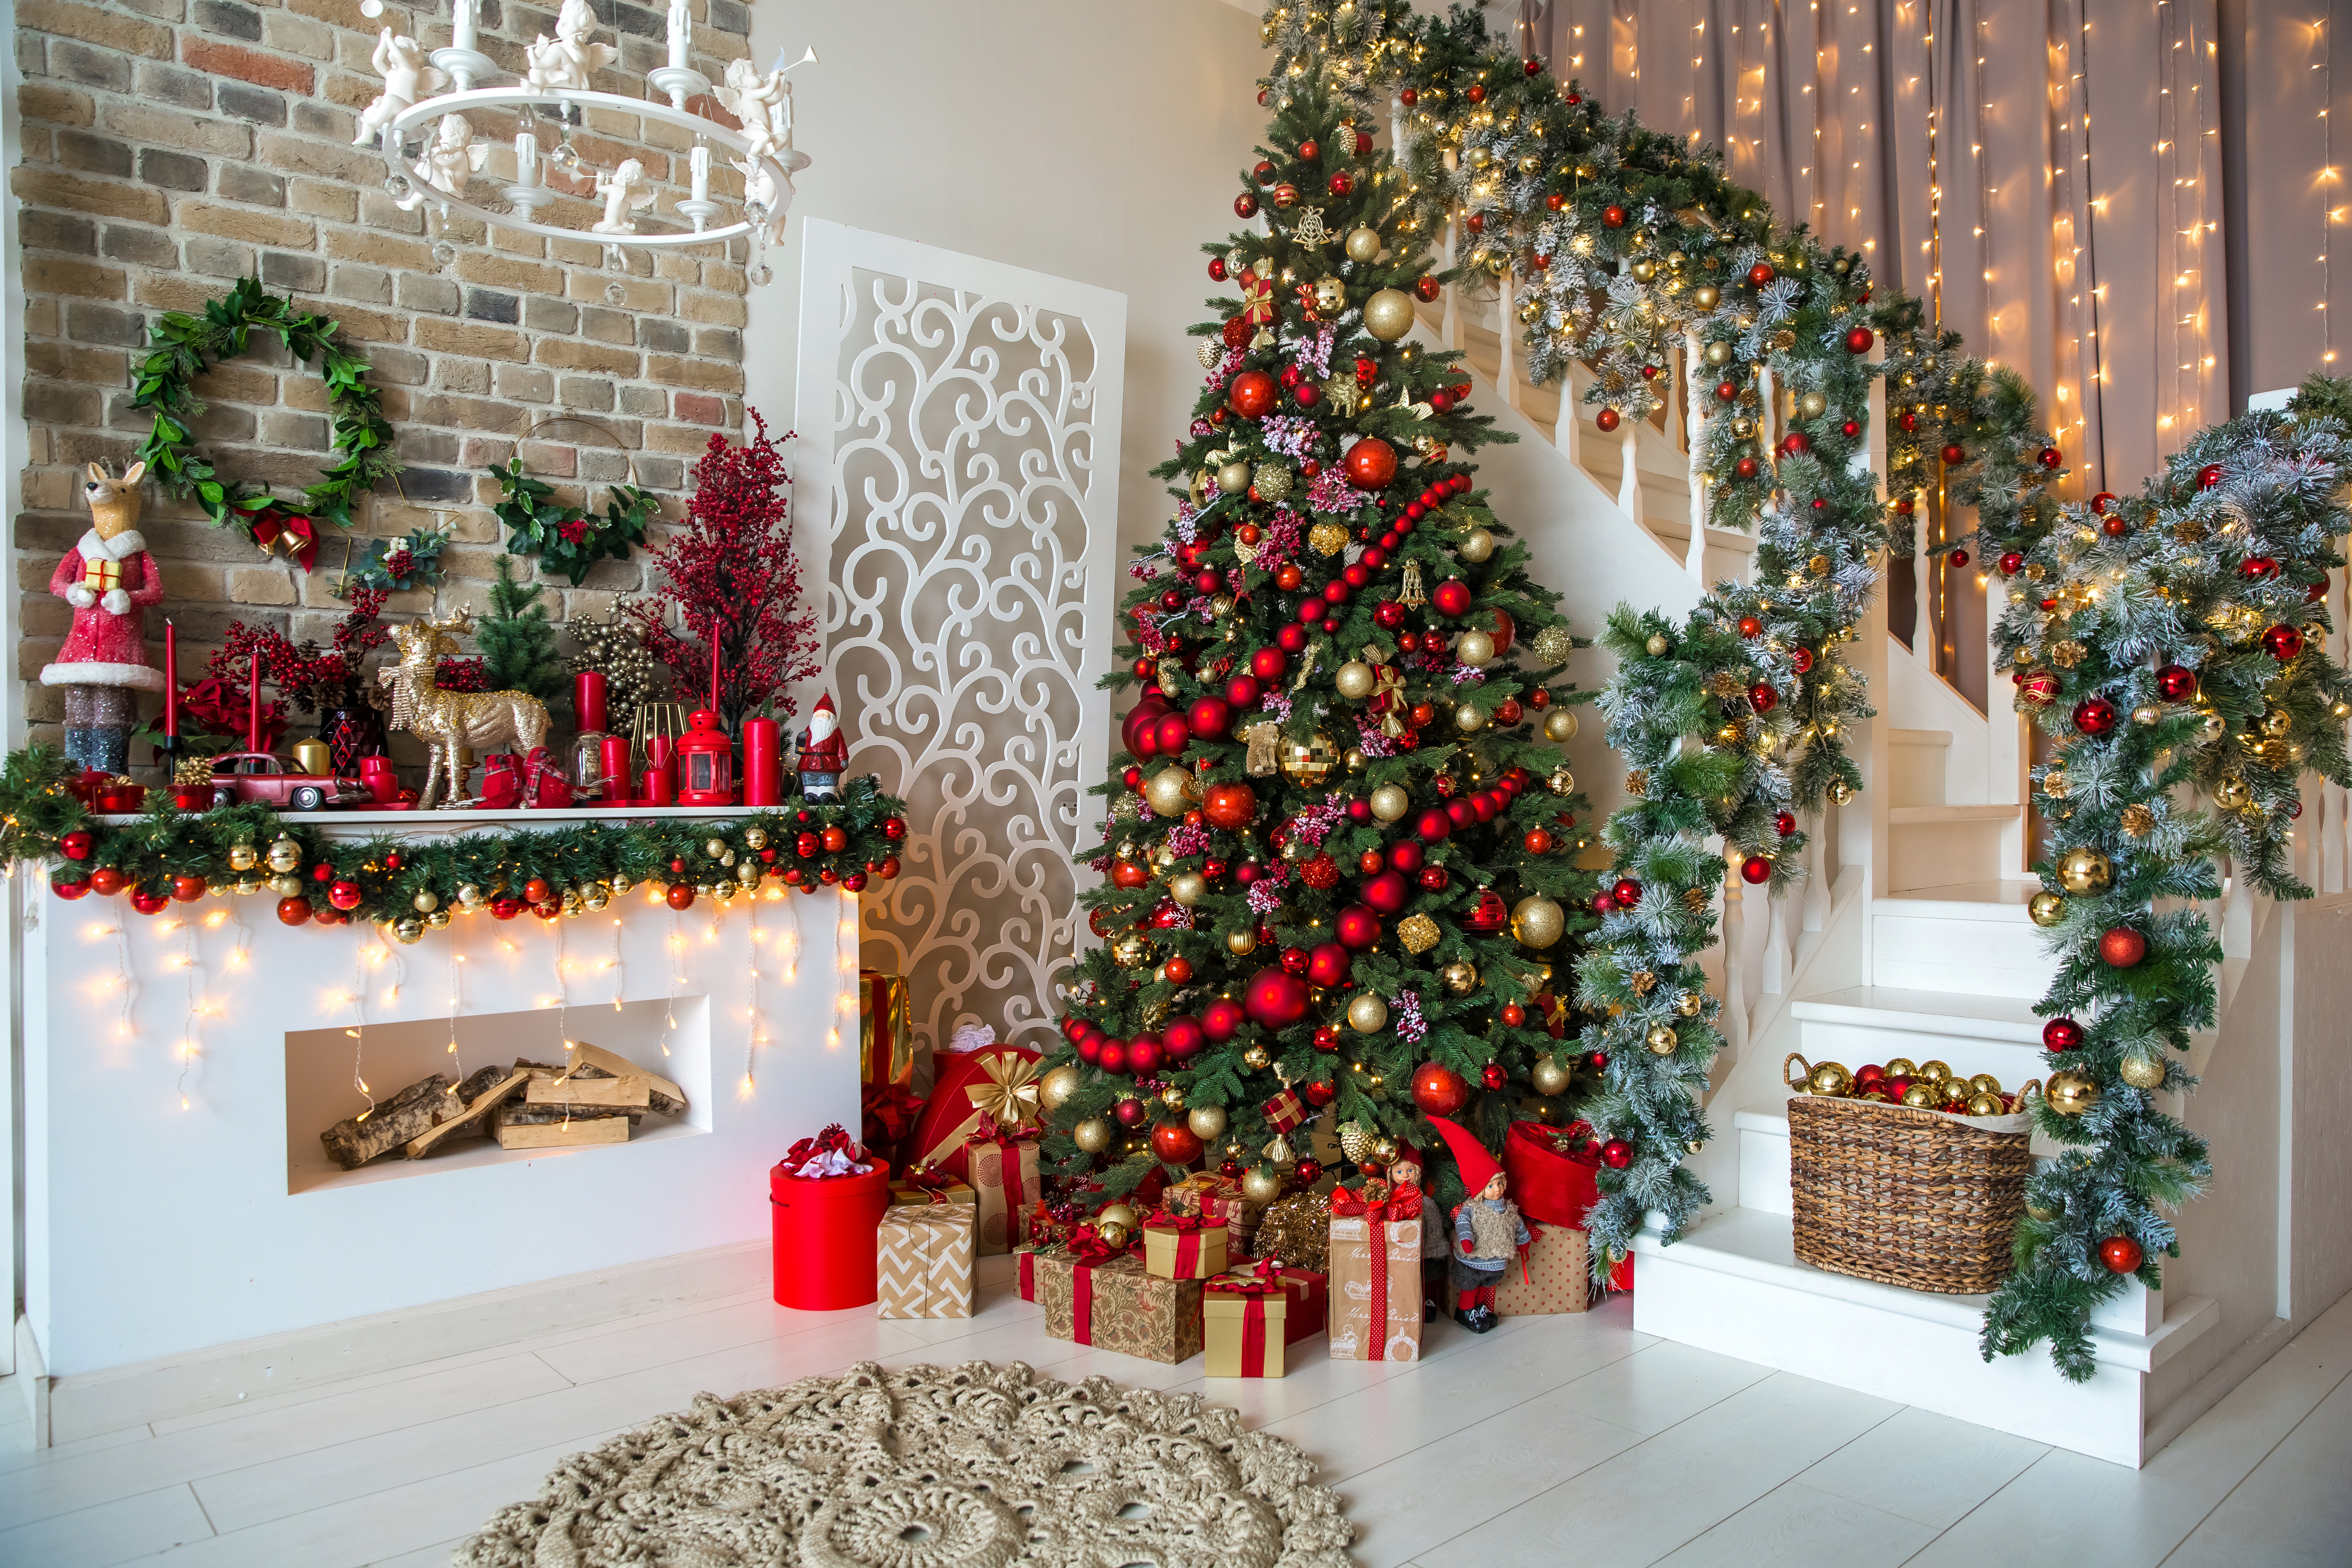 White room interior in red tones with New Year tree decorated, present boxes and artificial fireplace